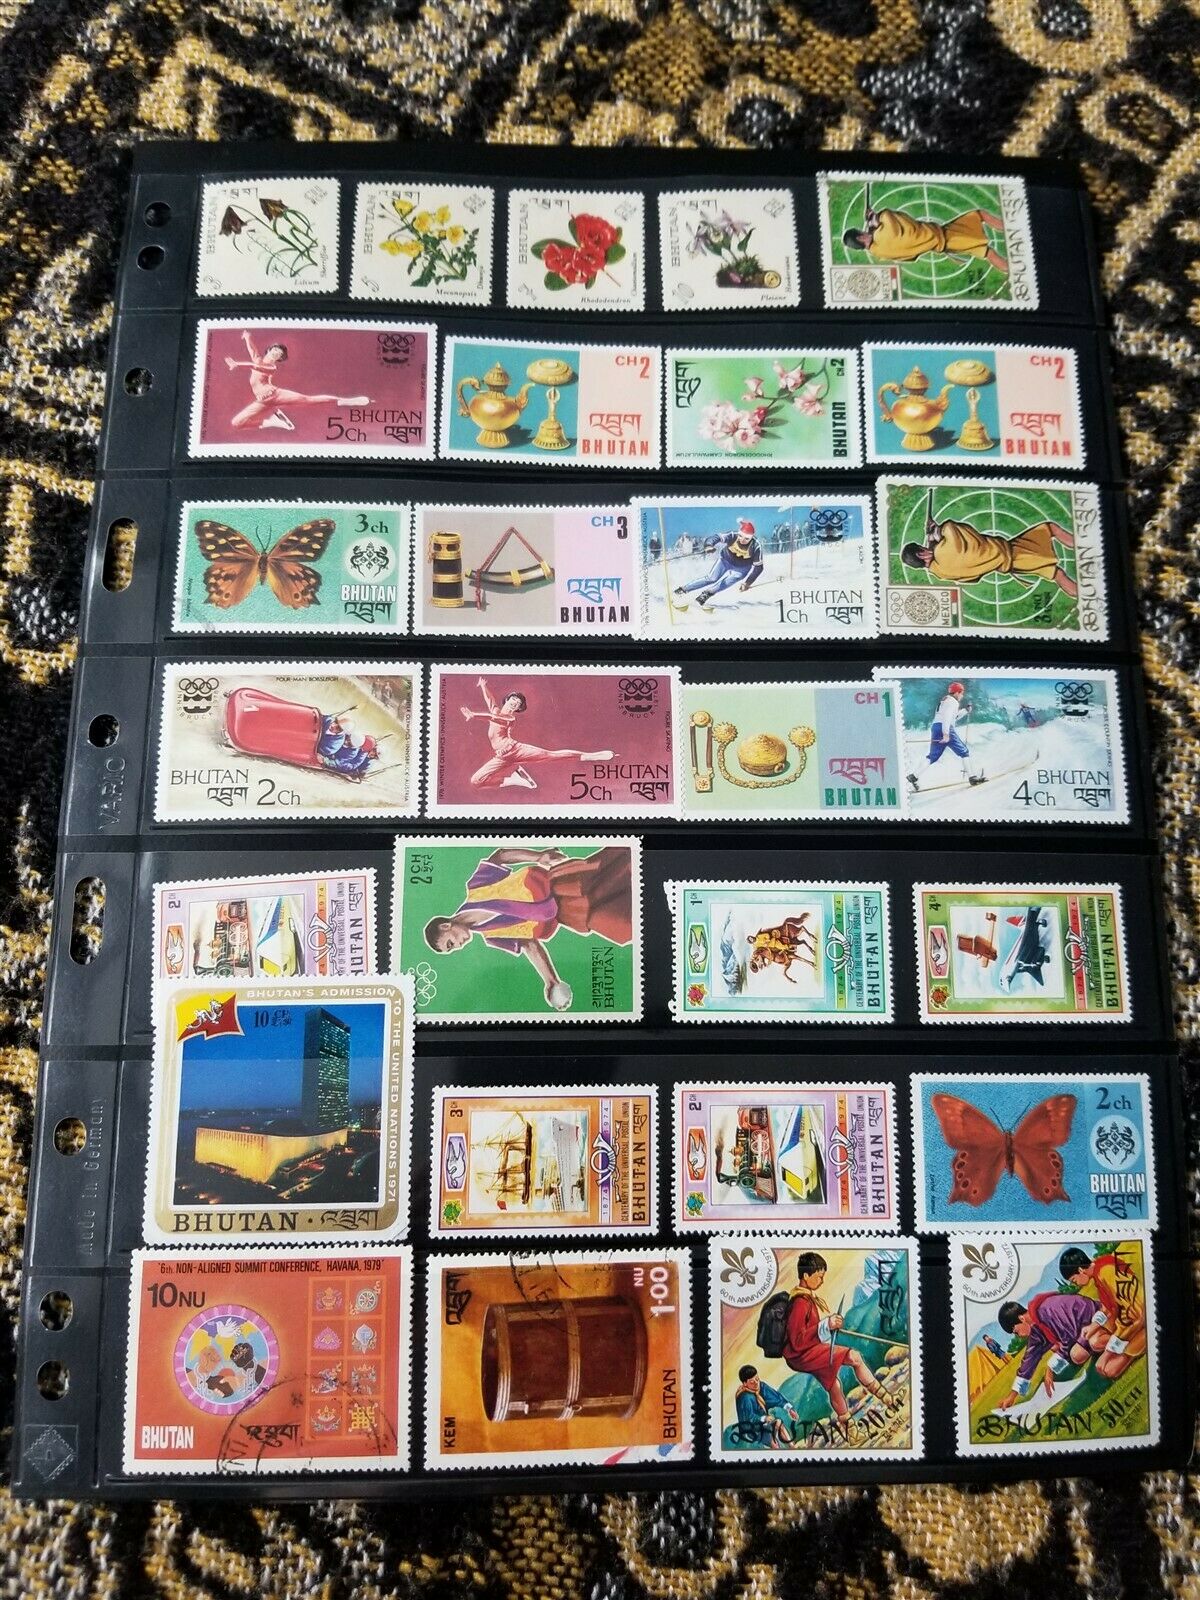 Bhutan Stamp Collection - Mixed Conditions - Topicals - 2 Scans - A110